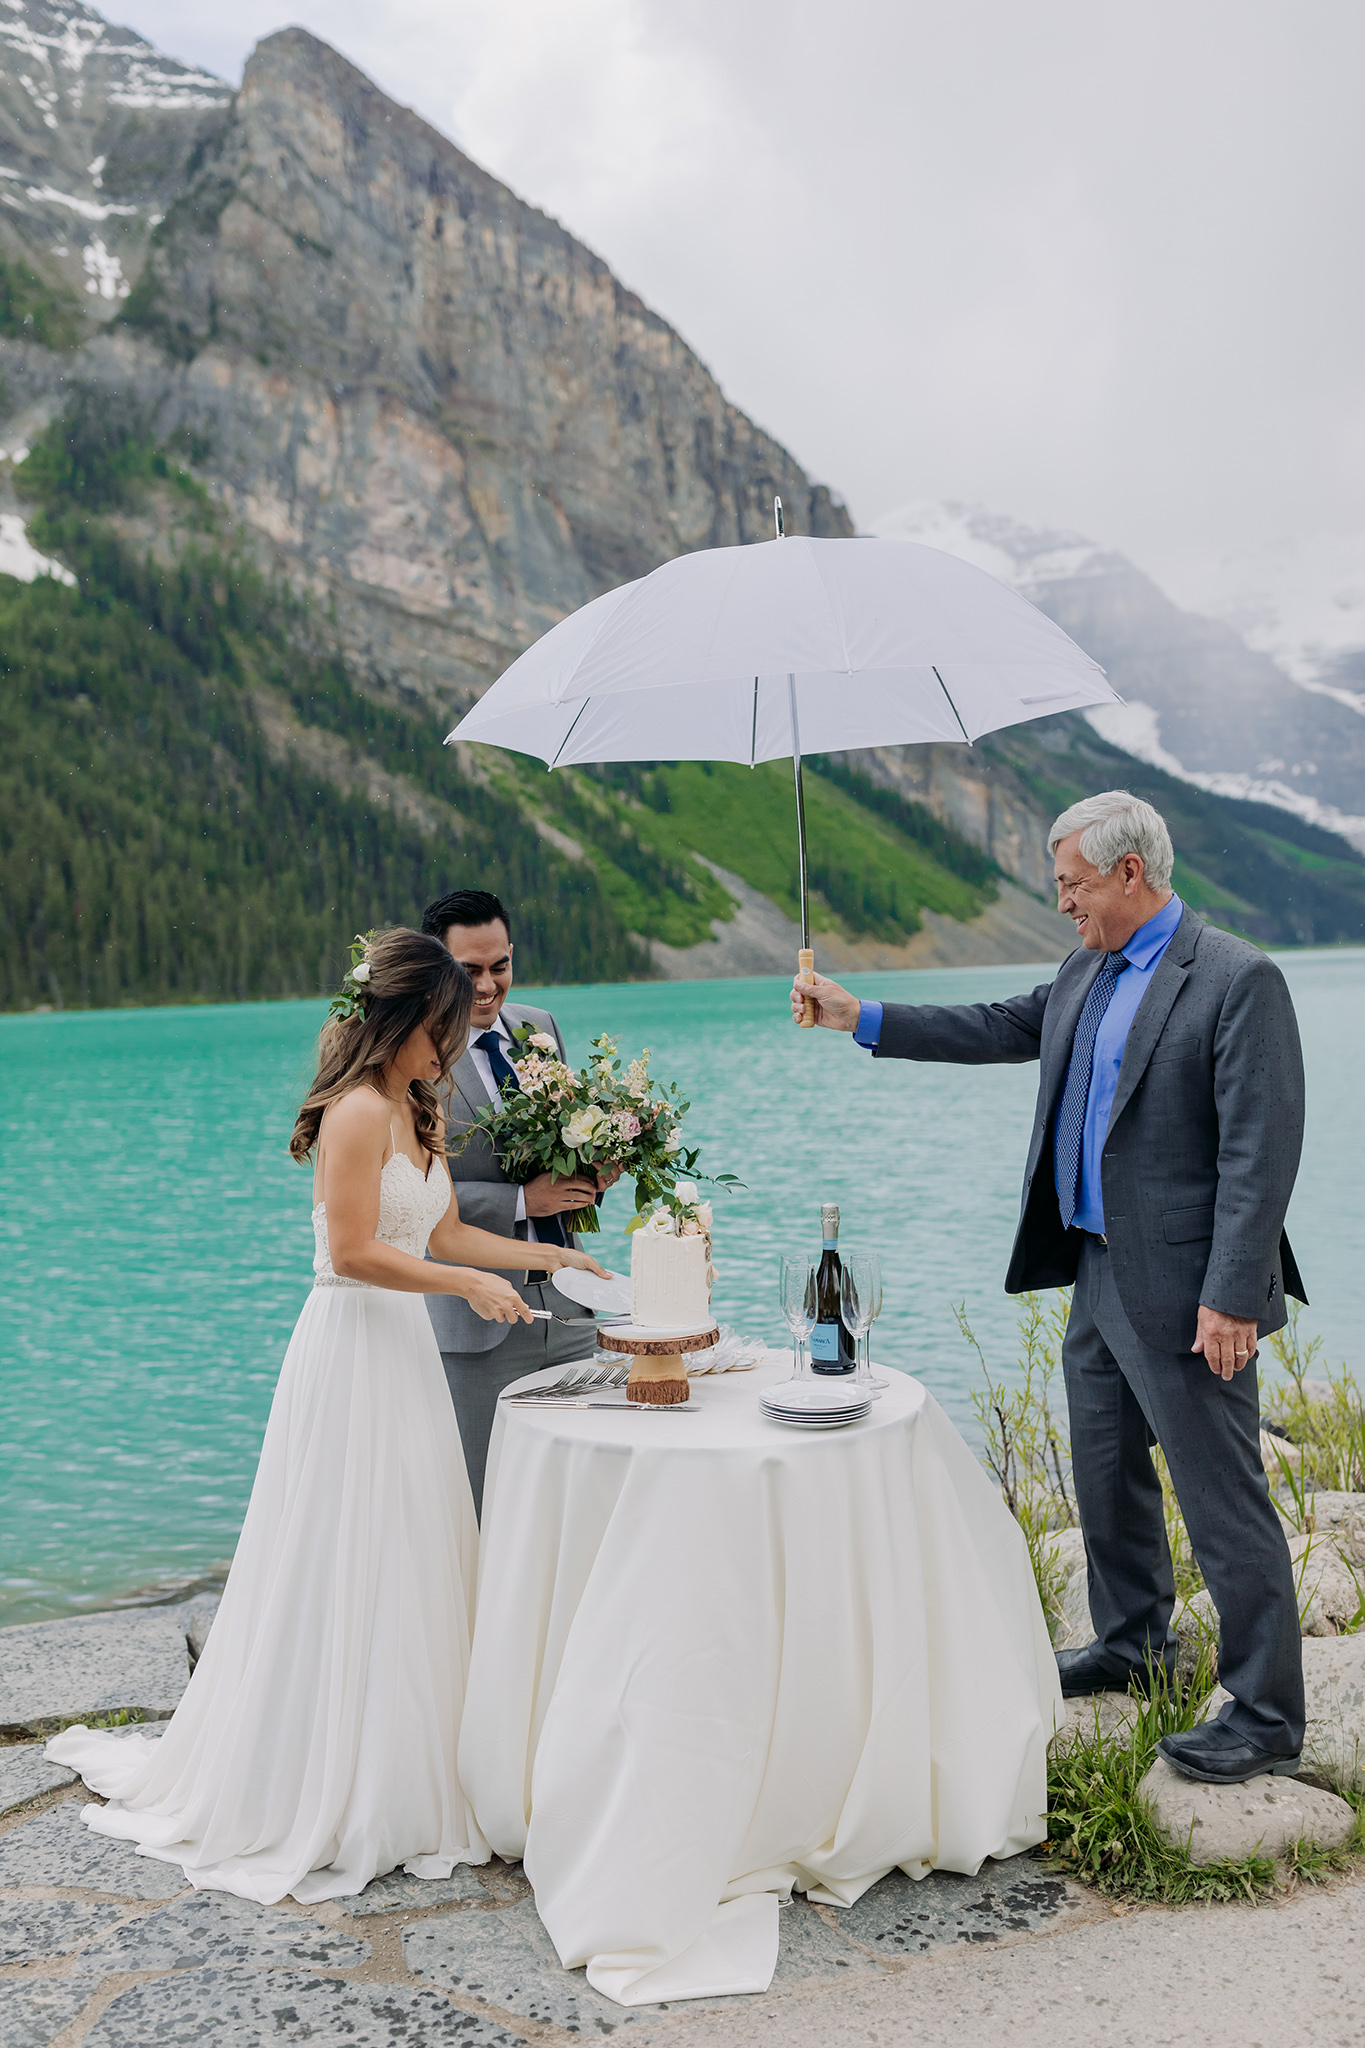 Lake Louise lakeshore wedding cake cutting photographed by elopement photographer ENV Photography